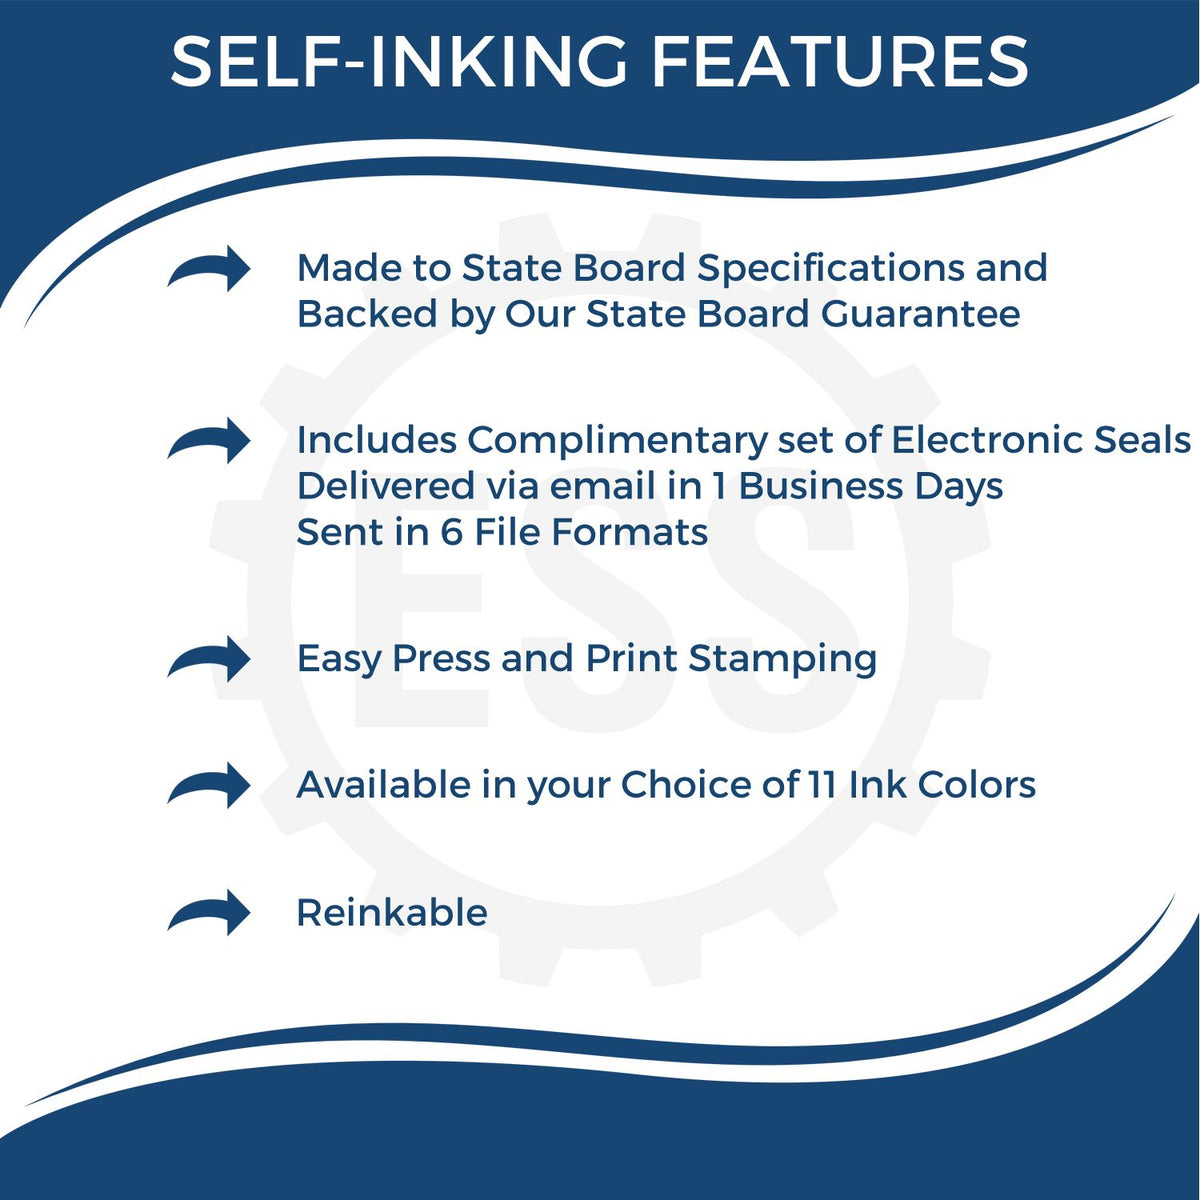 A picture of an infographic highlighting the selling points for the Self-Inking Illinois Landscape Architect Stamp